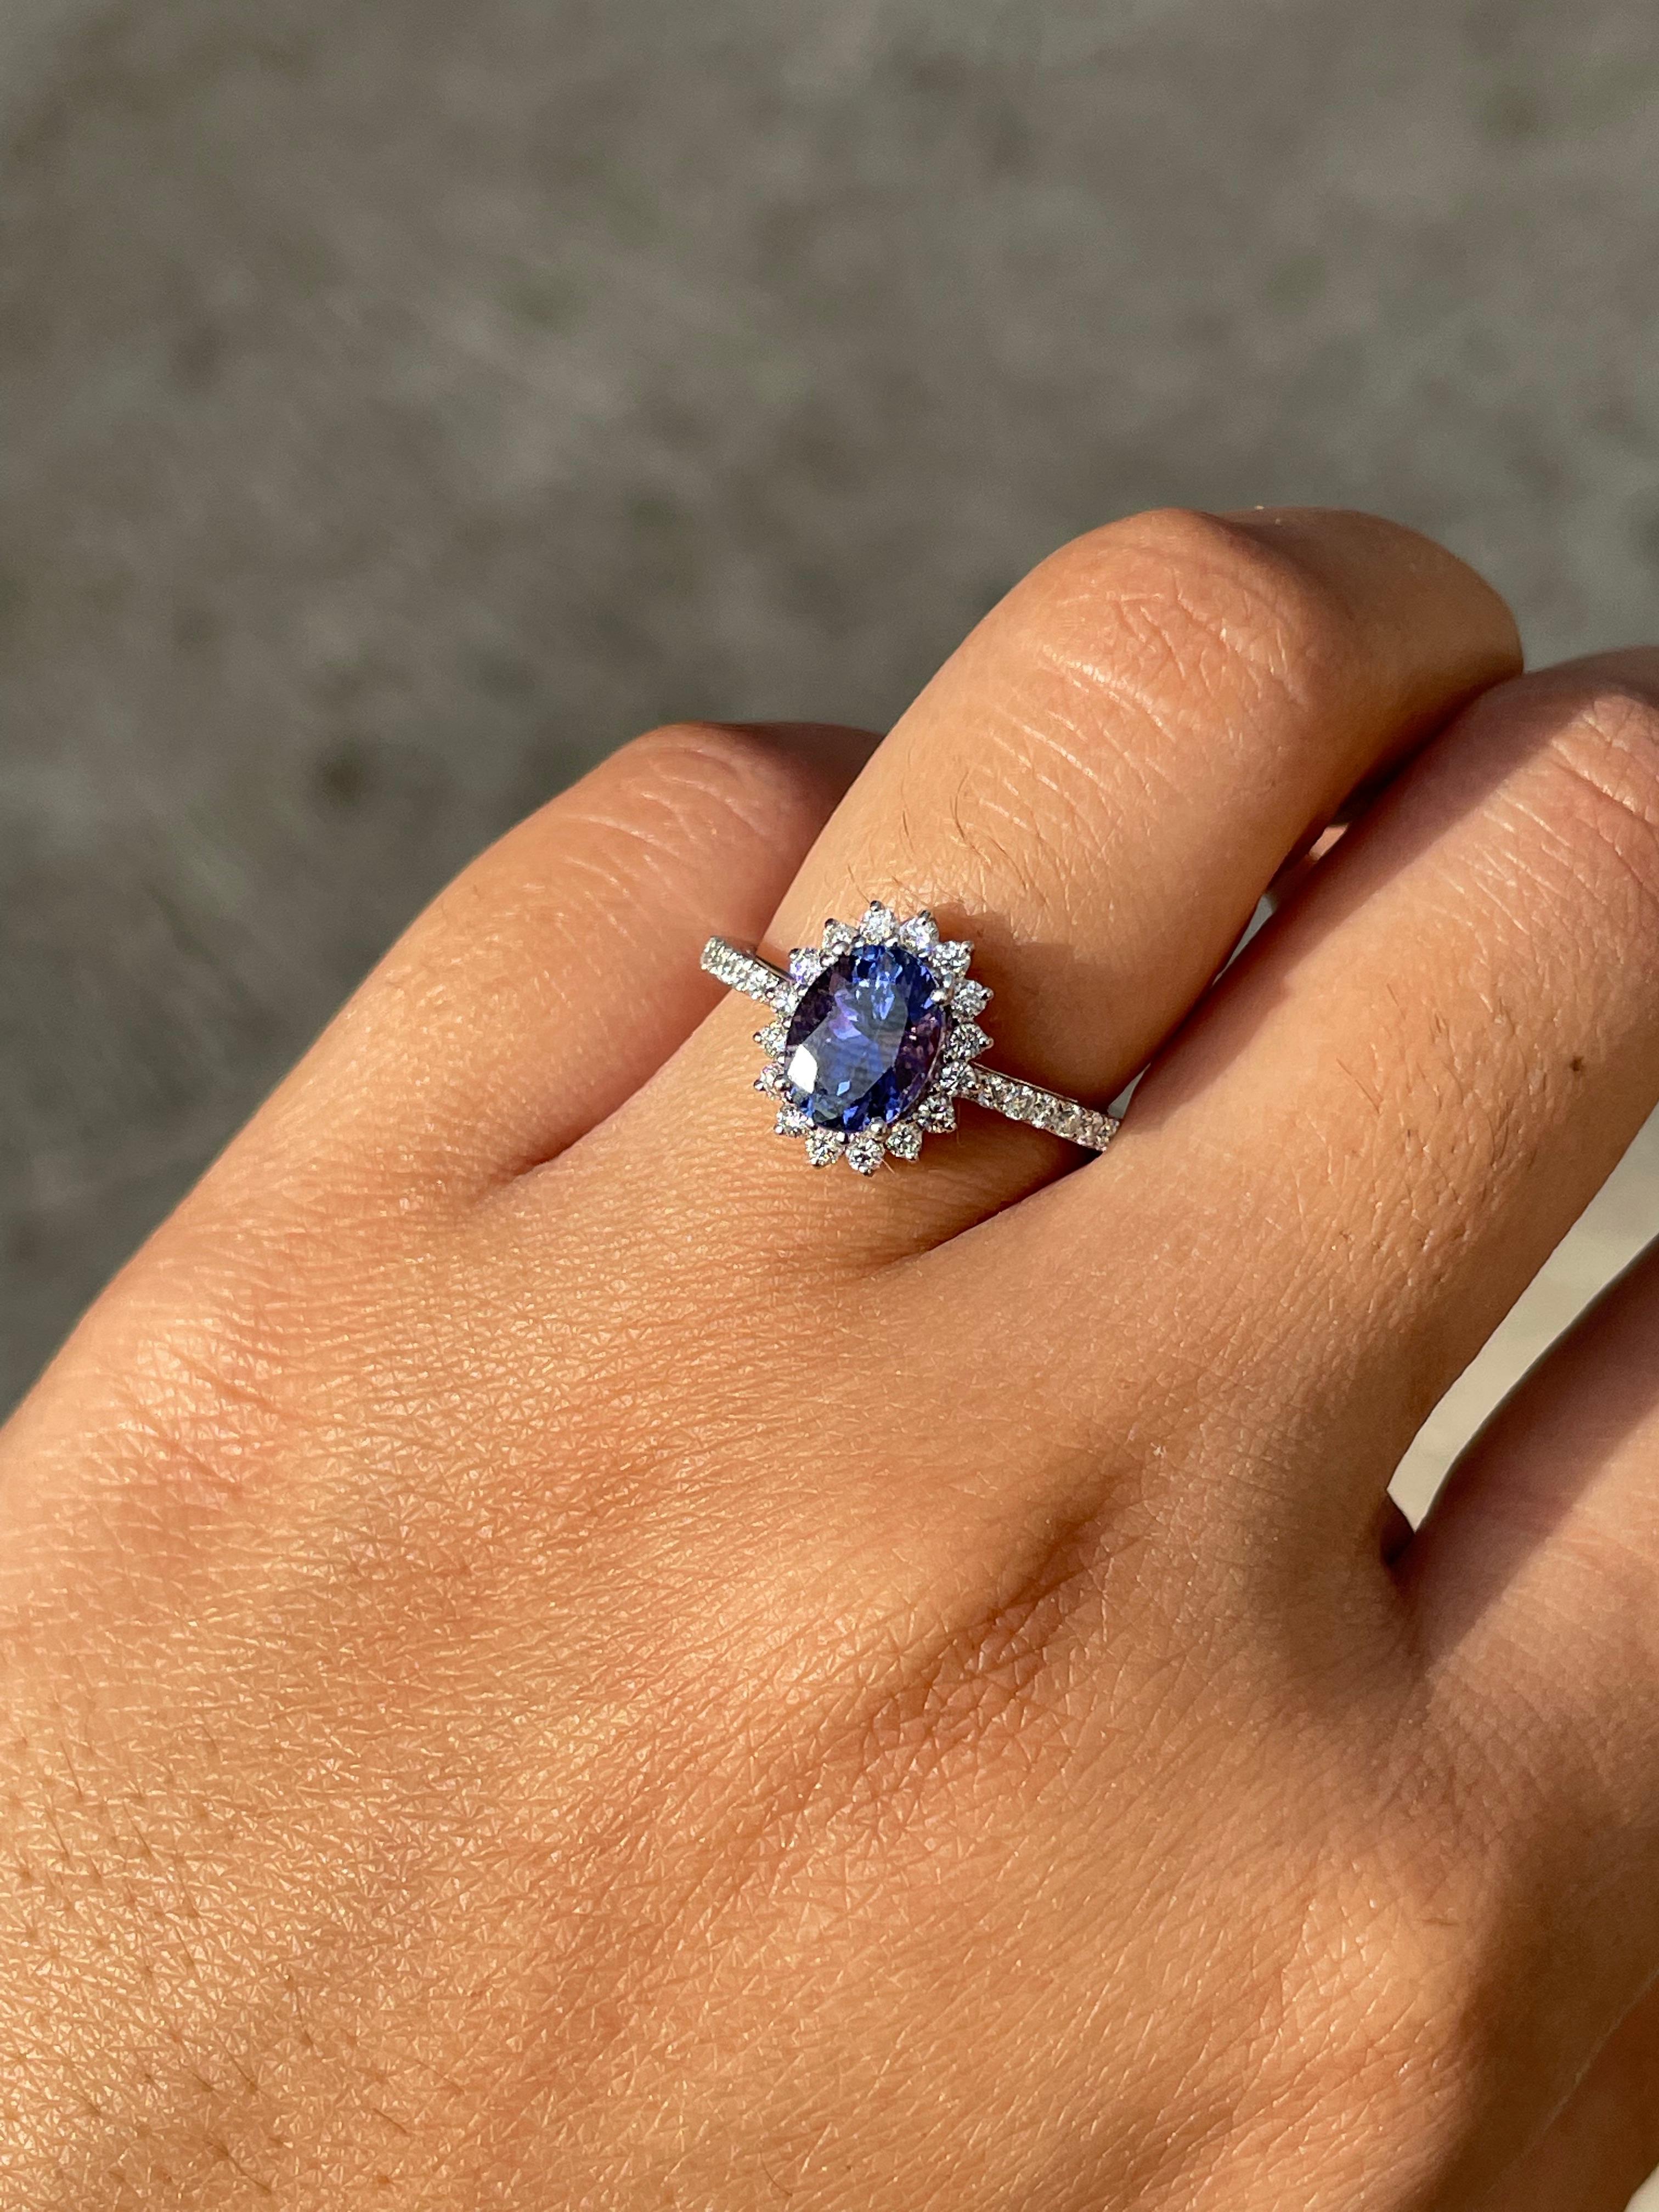 For Sale:  1.59 Carat Natural Tanzanite and Diamond Ring in 18k Solid White Gold 6